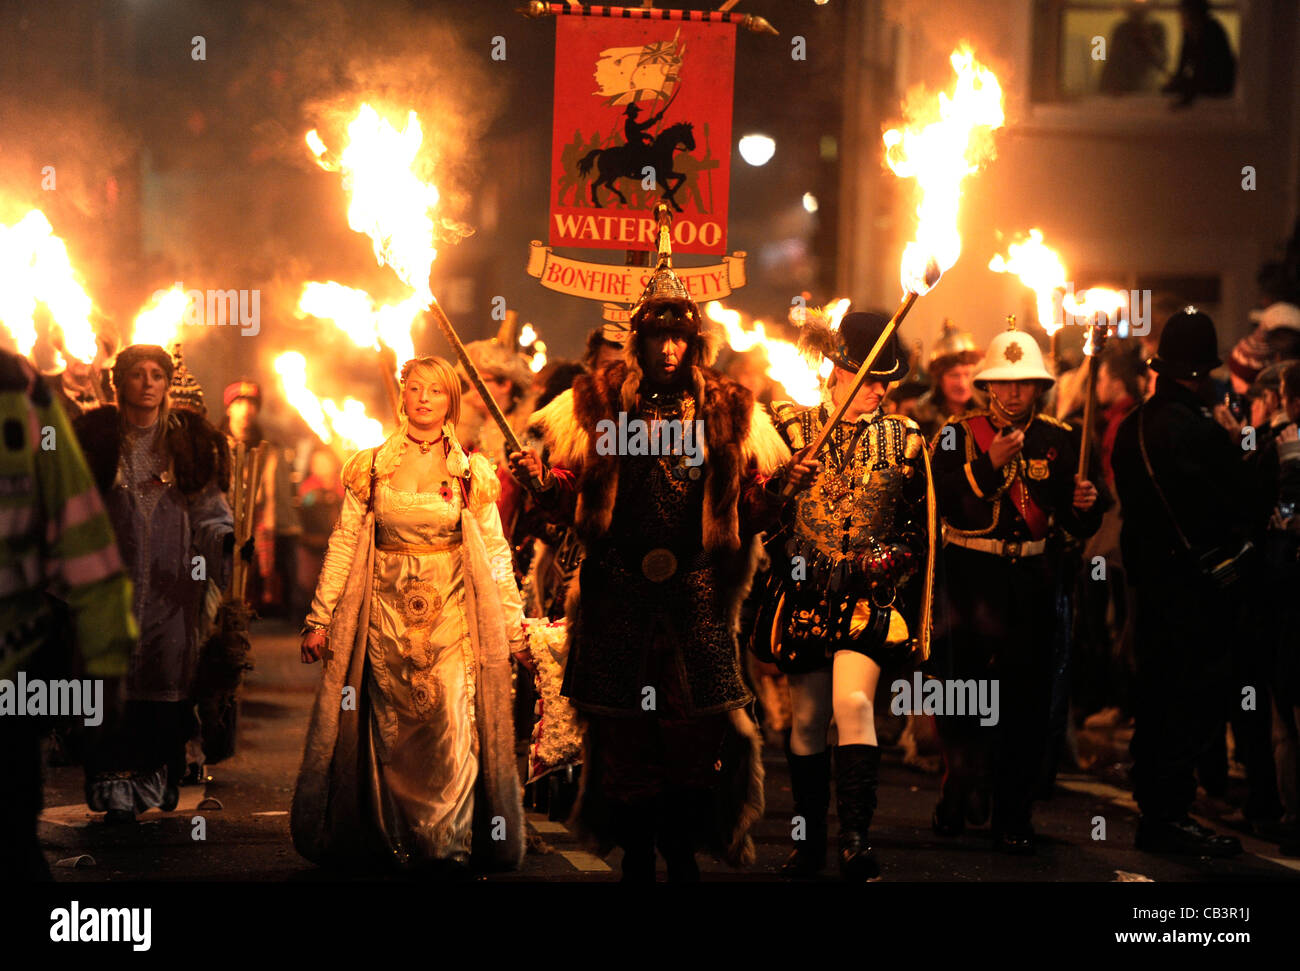 Procession in Lewes bonfire night celebrations showing Waterloo Bonfire ...